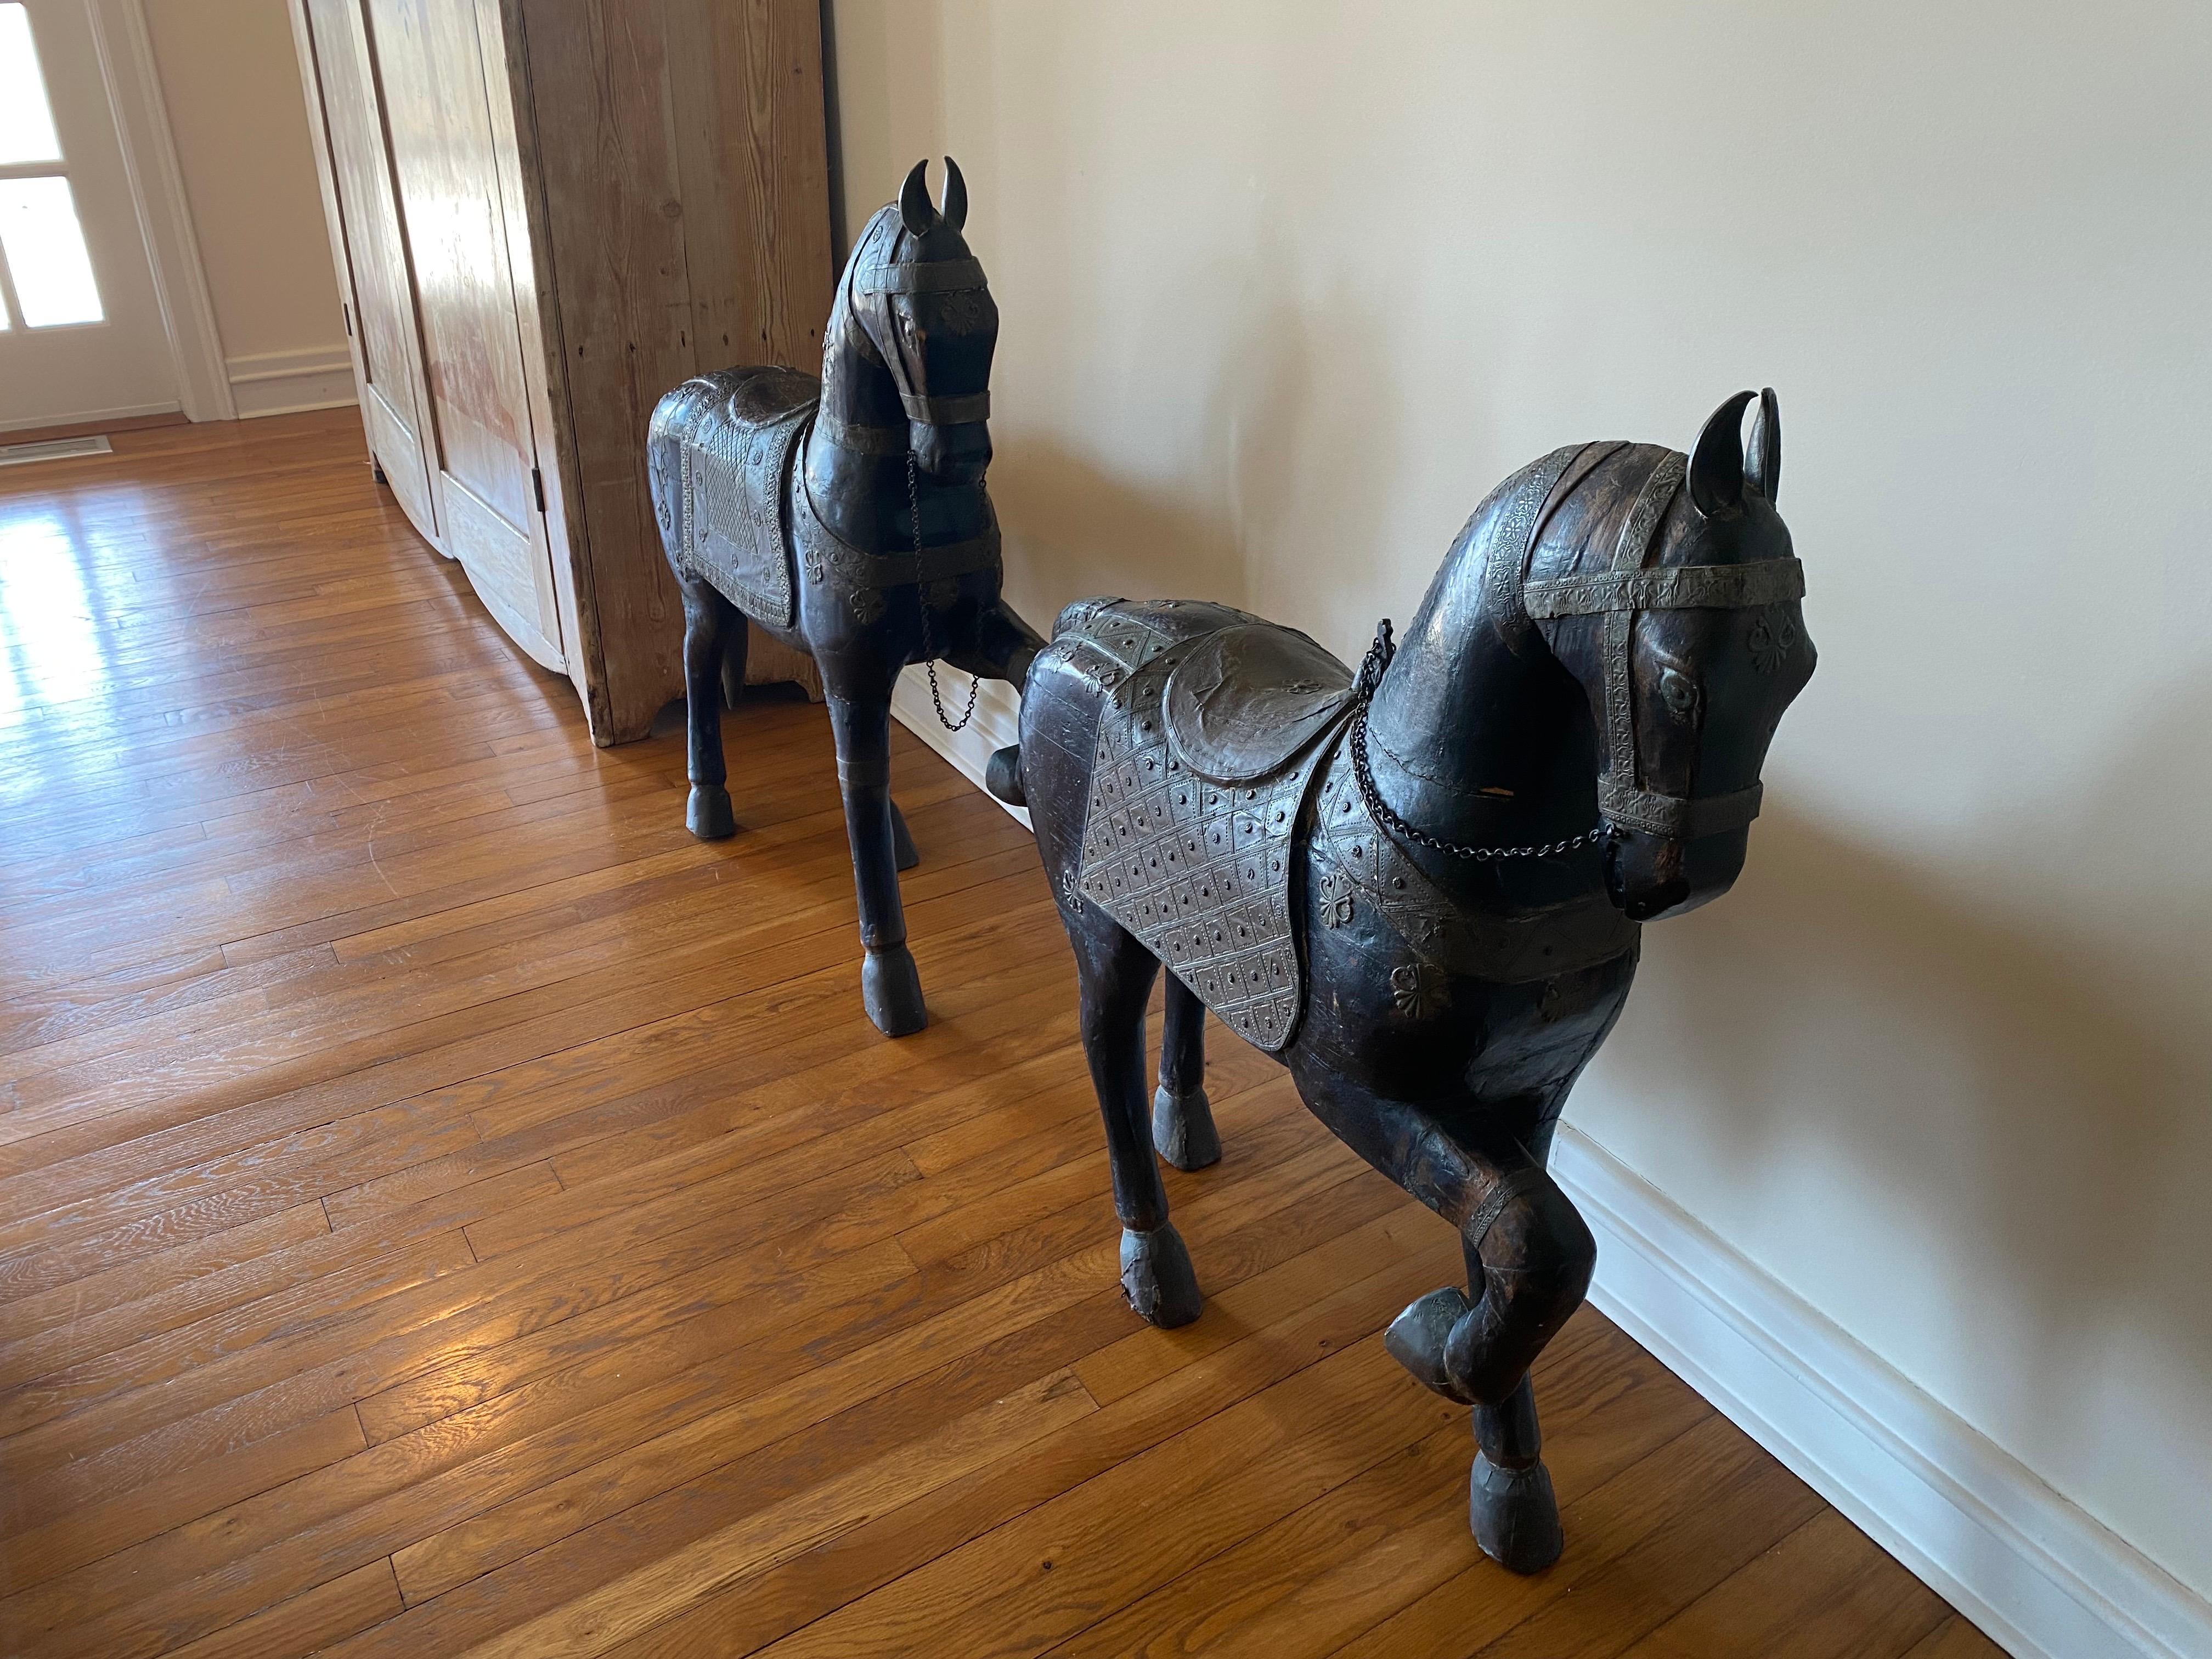 Pair of Late 19th C Indian Carved Wood Painted Horse Sculptures
Black painted carved wood horses with elaborate metal work design on saddle and harness. General wear, separation and a chip to wood on horse neck on right horse. 

Provenance: Private